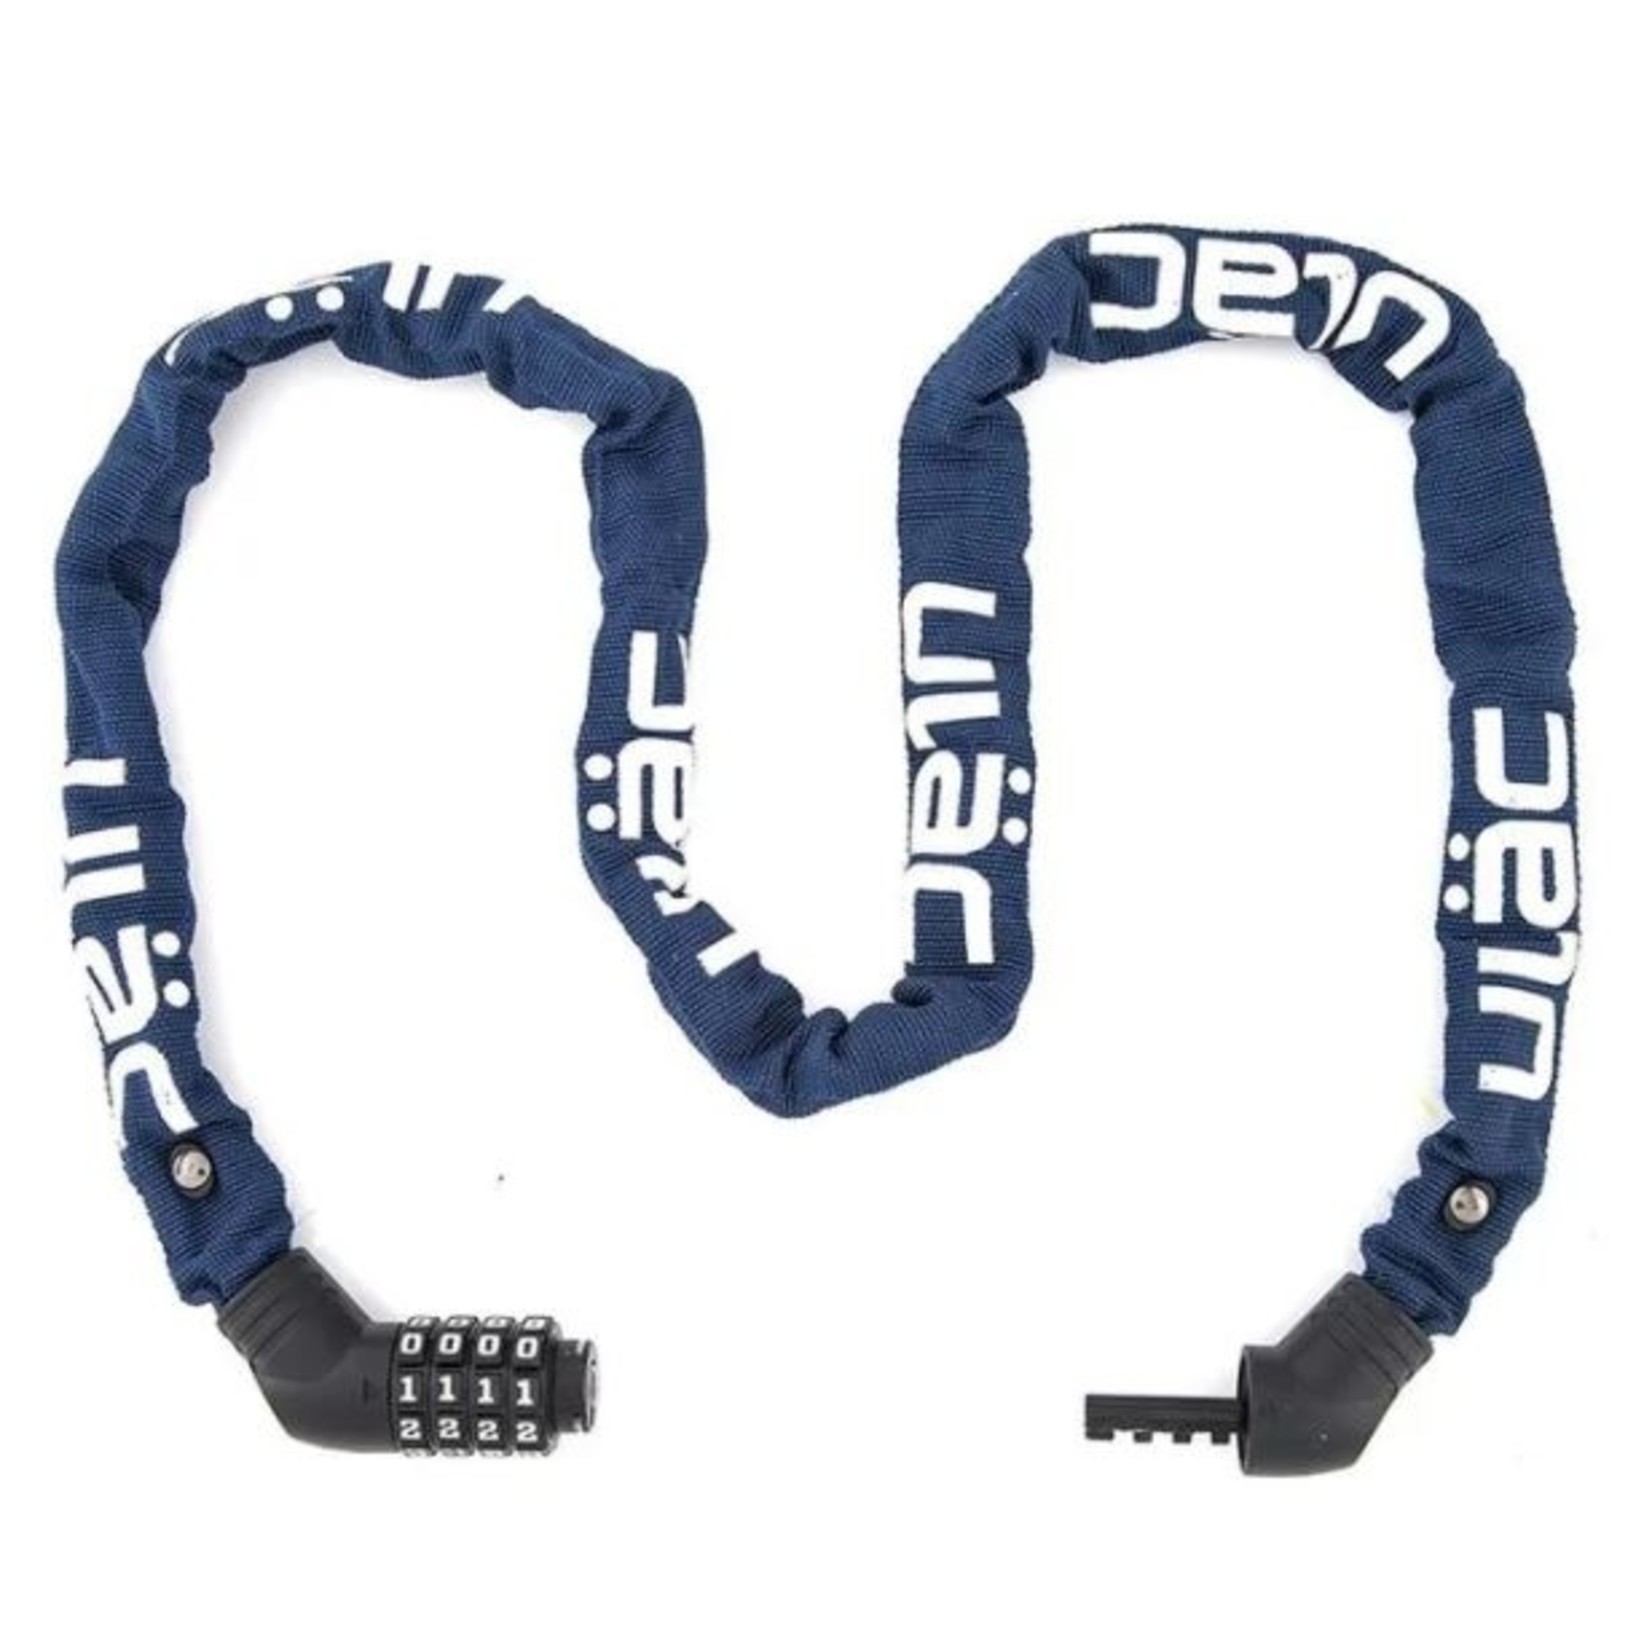 ULAC ULAC Street Fighter Combo Chain Lock - 5mm x 100cm - Navy Blue